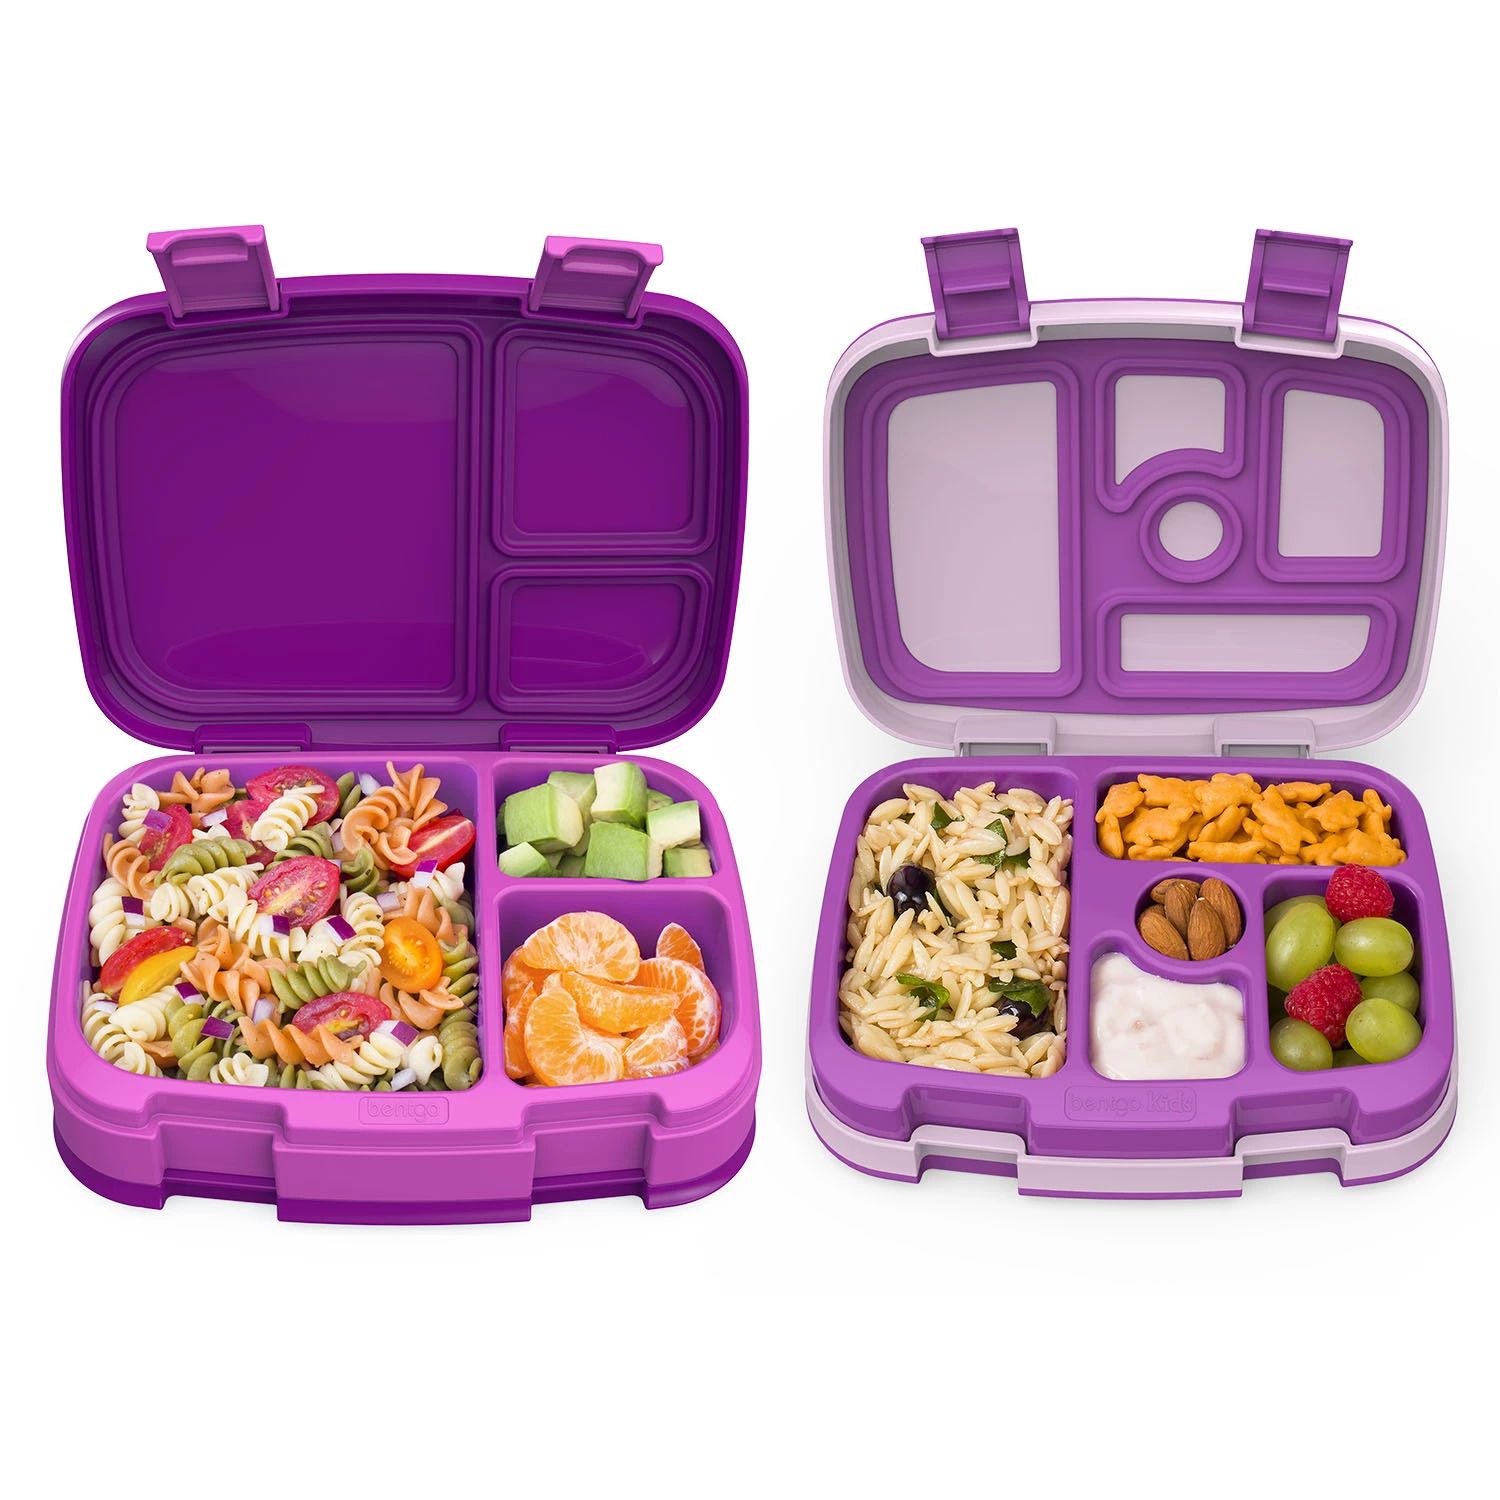 One Bentgo Fresh and One Bentgo Kids Lunch Box (Assorted Colors) | Sam's Club